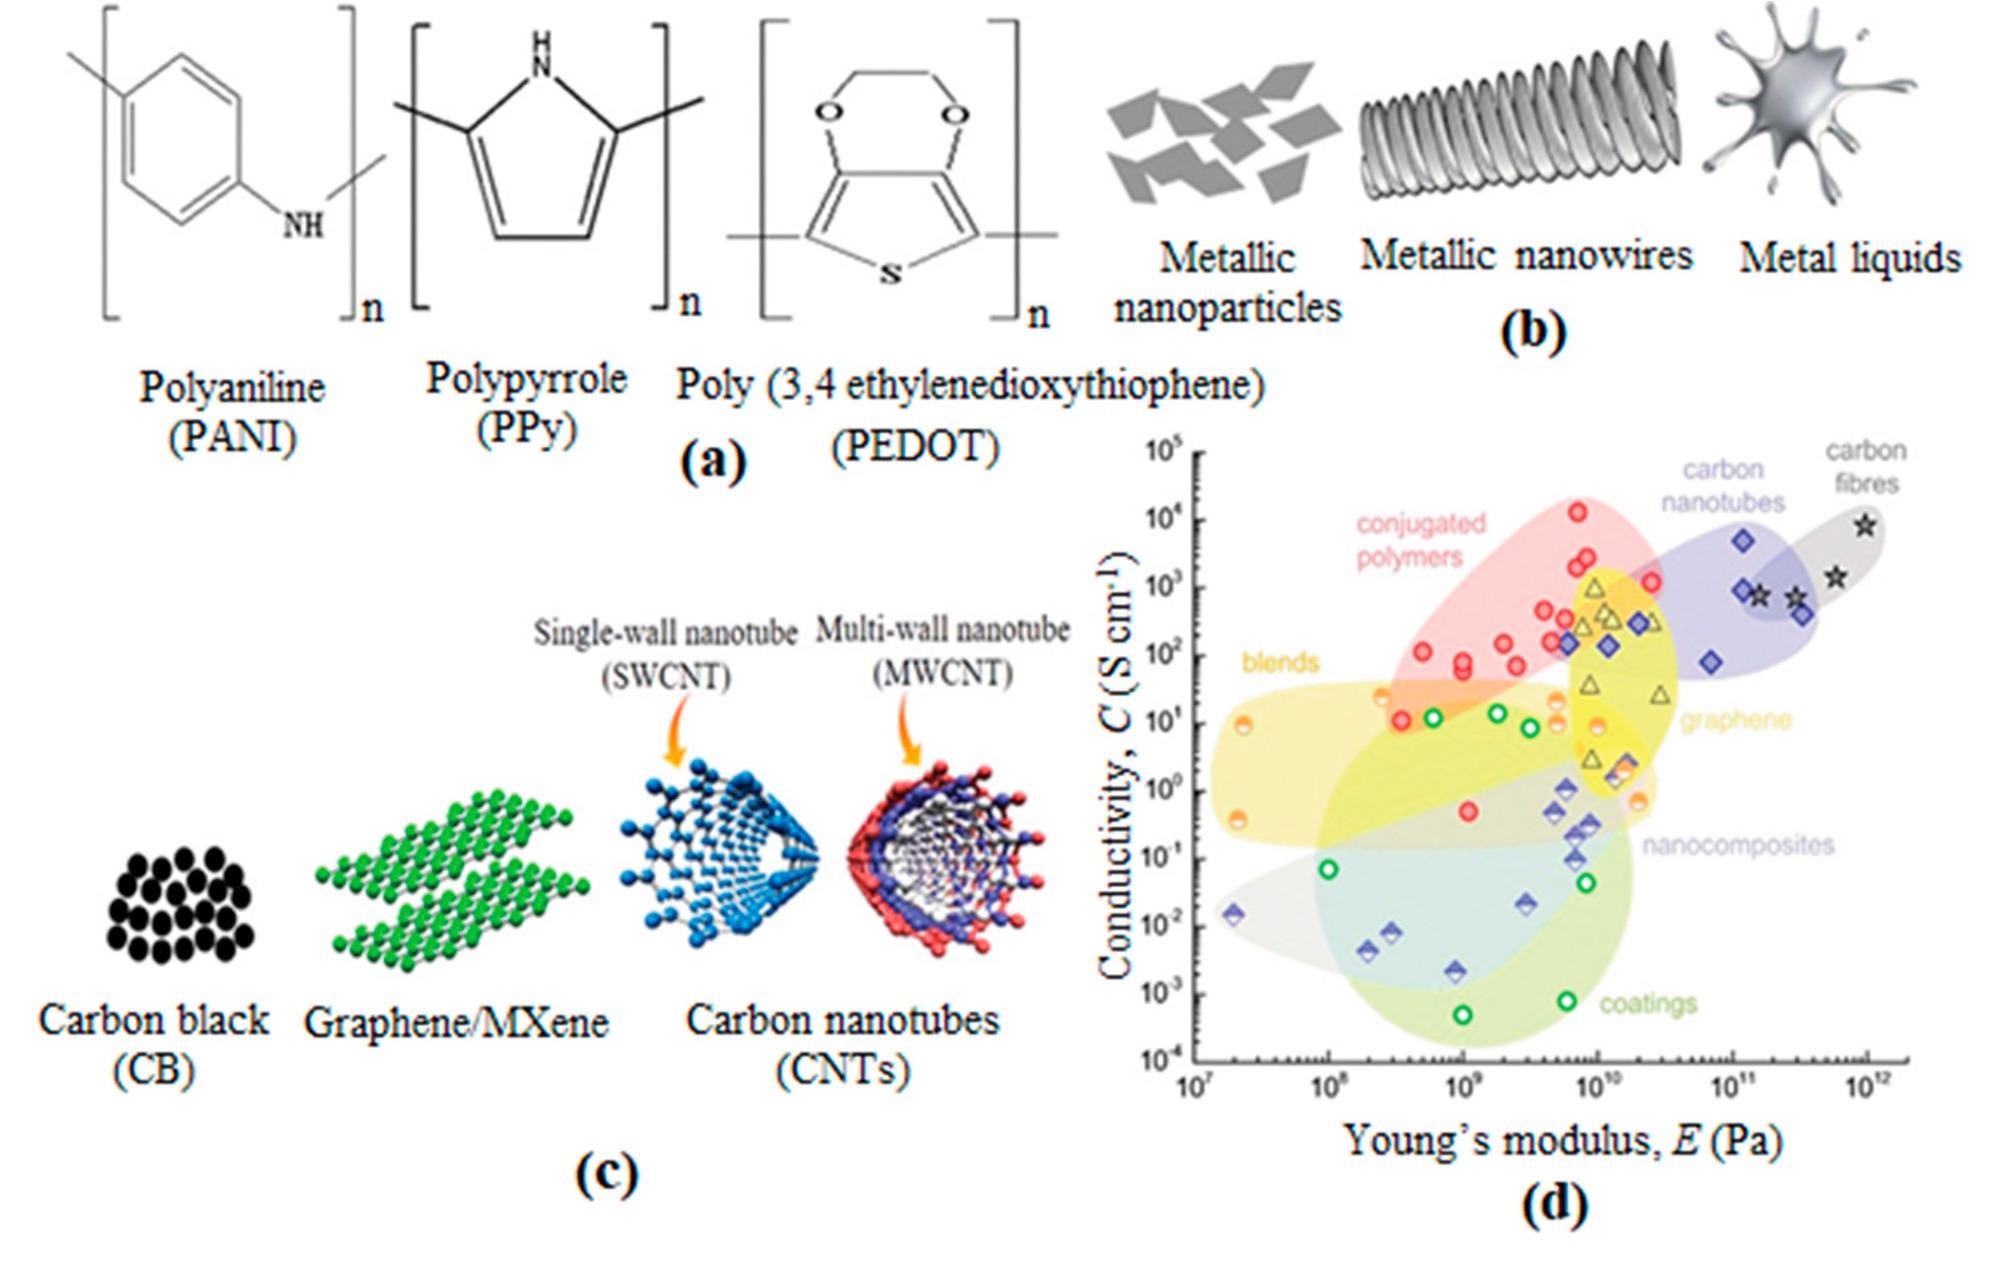 (a) Polymeric, (b) metallic, and (c) carbon-based electroactive materials for e-textiles. (d) Electrical conductivity vs. Young’s modulus of different electroactive fibres based on CNTs (blue diamonds), carbon fibers (gray stars), ICPs (red circles), blends of conjugated and insulating polymers (orange/white circles), graphene (yellow triangles), nanocomposites of CB (blue/white diamonds), CNTs or graphene embedded in an insulating polymer matrix and (green/white circles) coatings of textile fibers with ICPs, CNTs, or graphene .